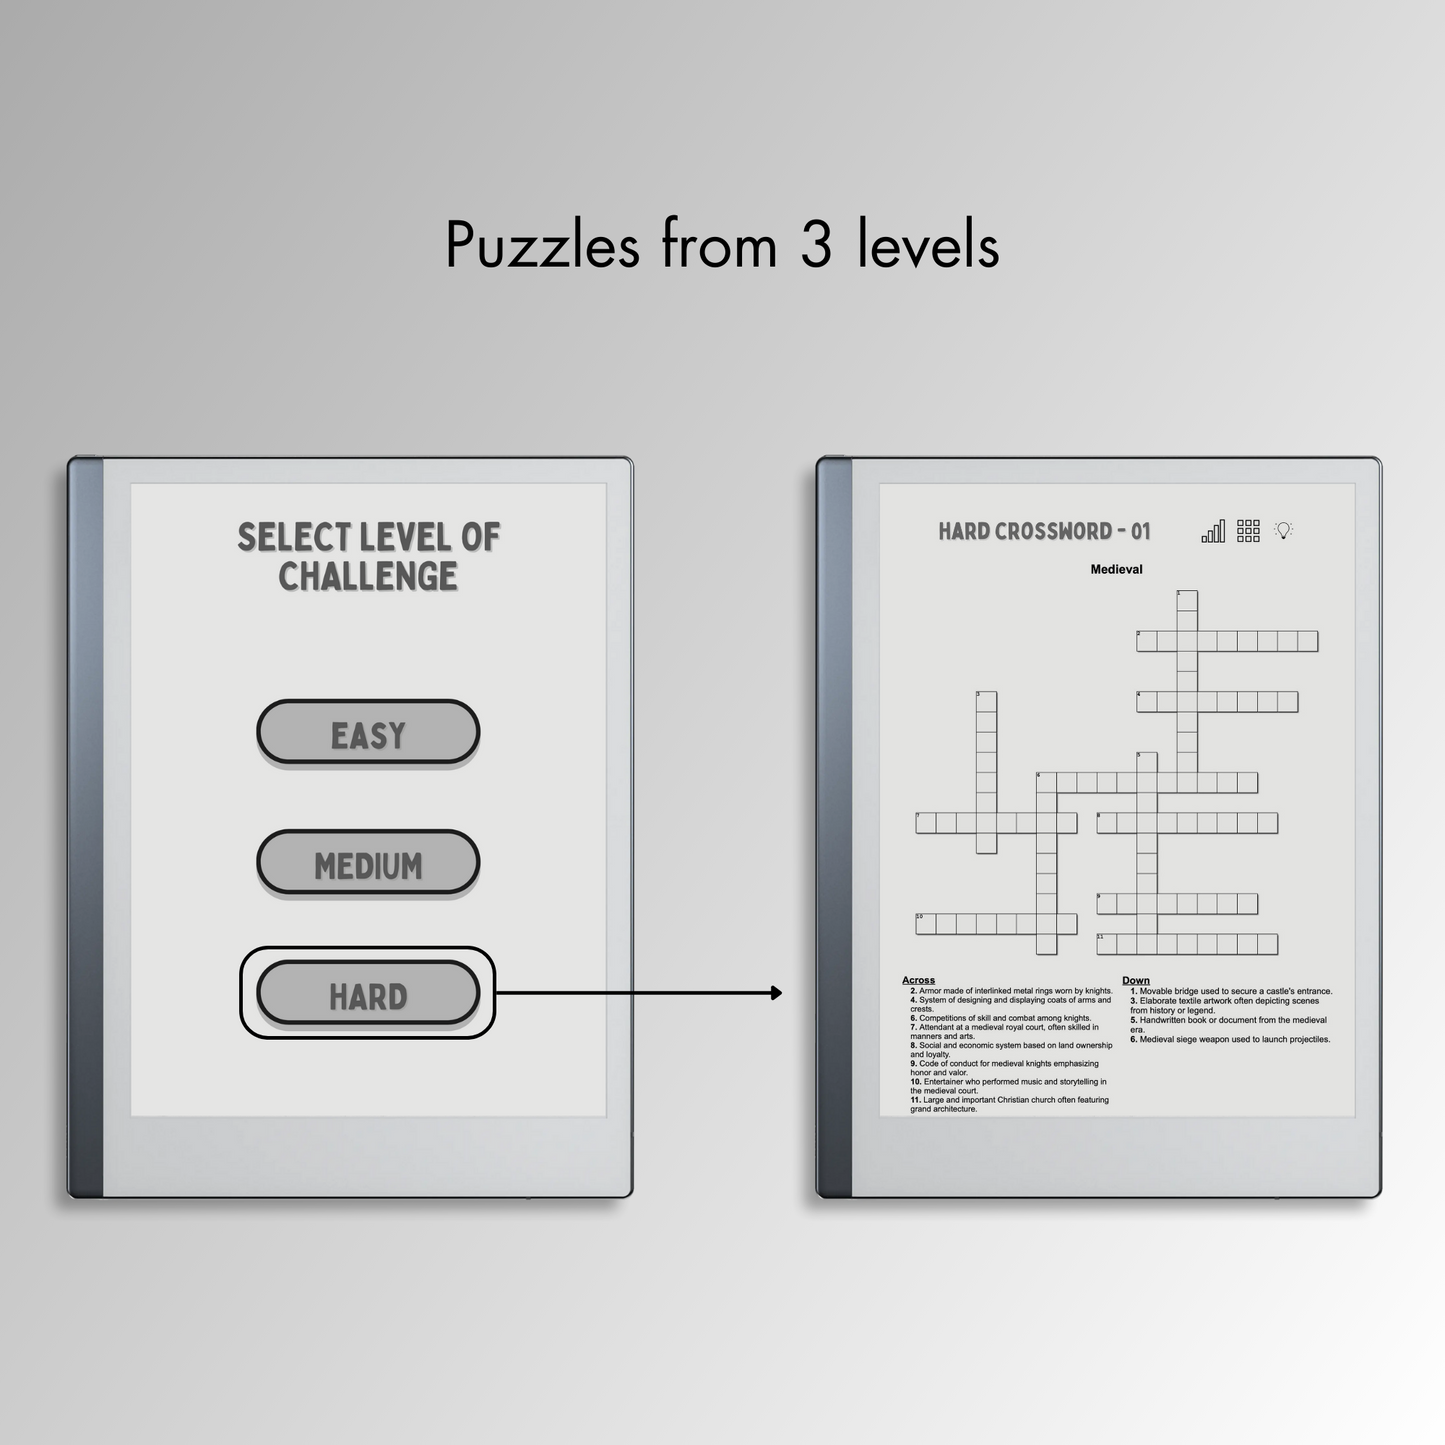 Remarkable 2 Crossword Puzzles in 3 different levels.